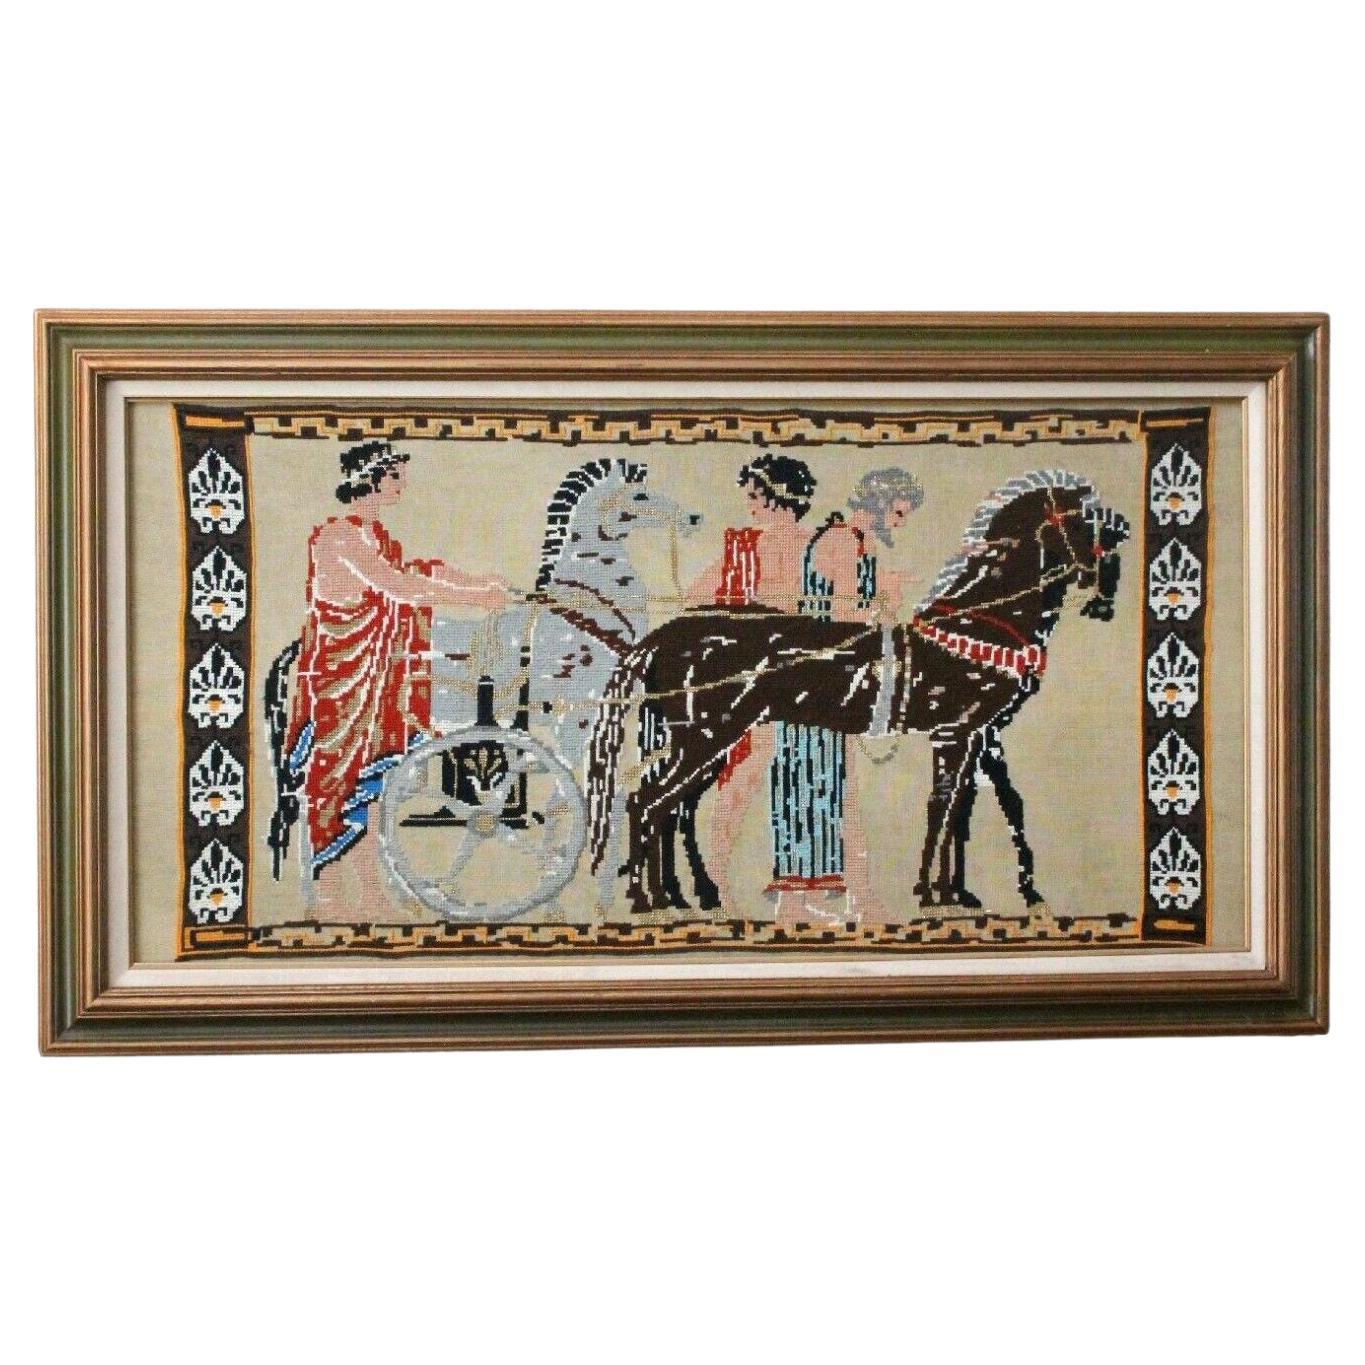 COLOSSAL! MCM Greek Revival Tapestry! 1950s Frederic Weinberg Era Wall Art Decor For Sale